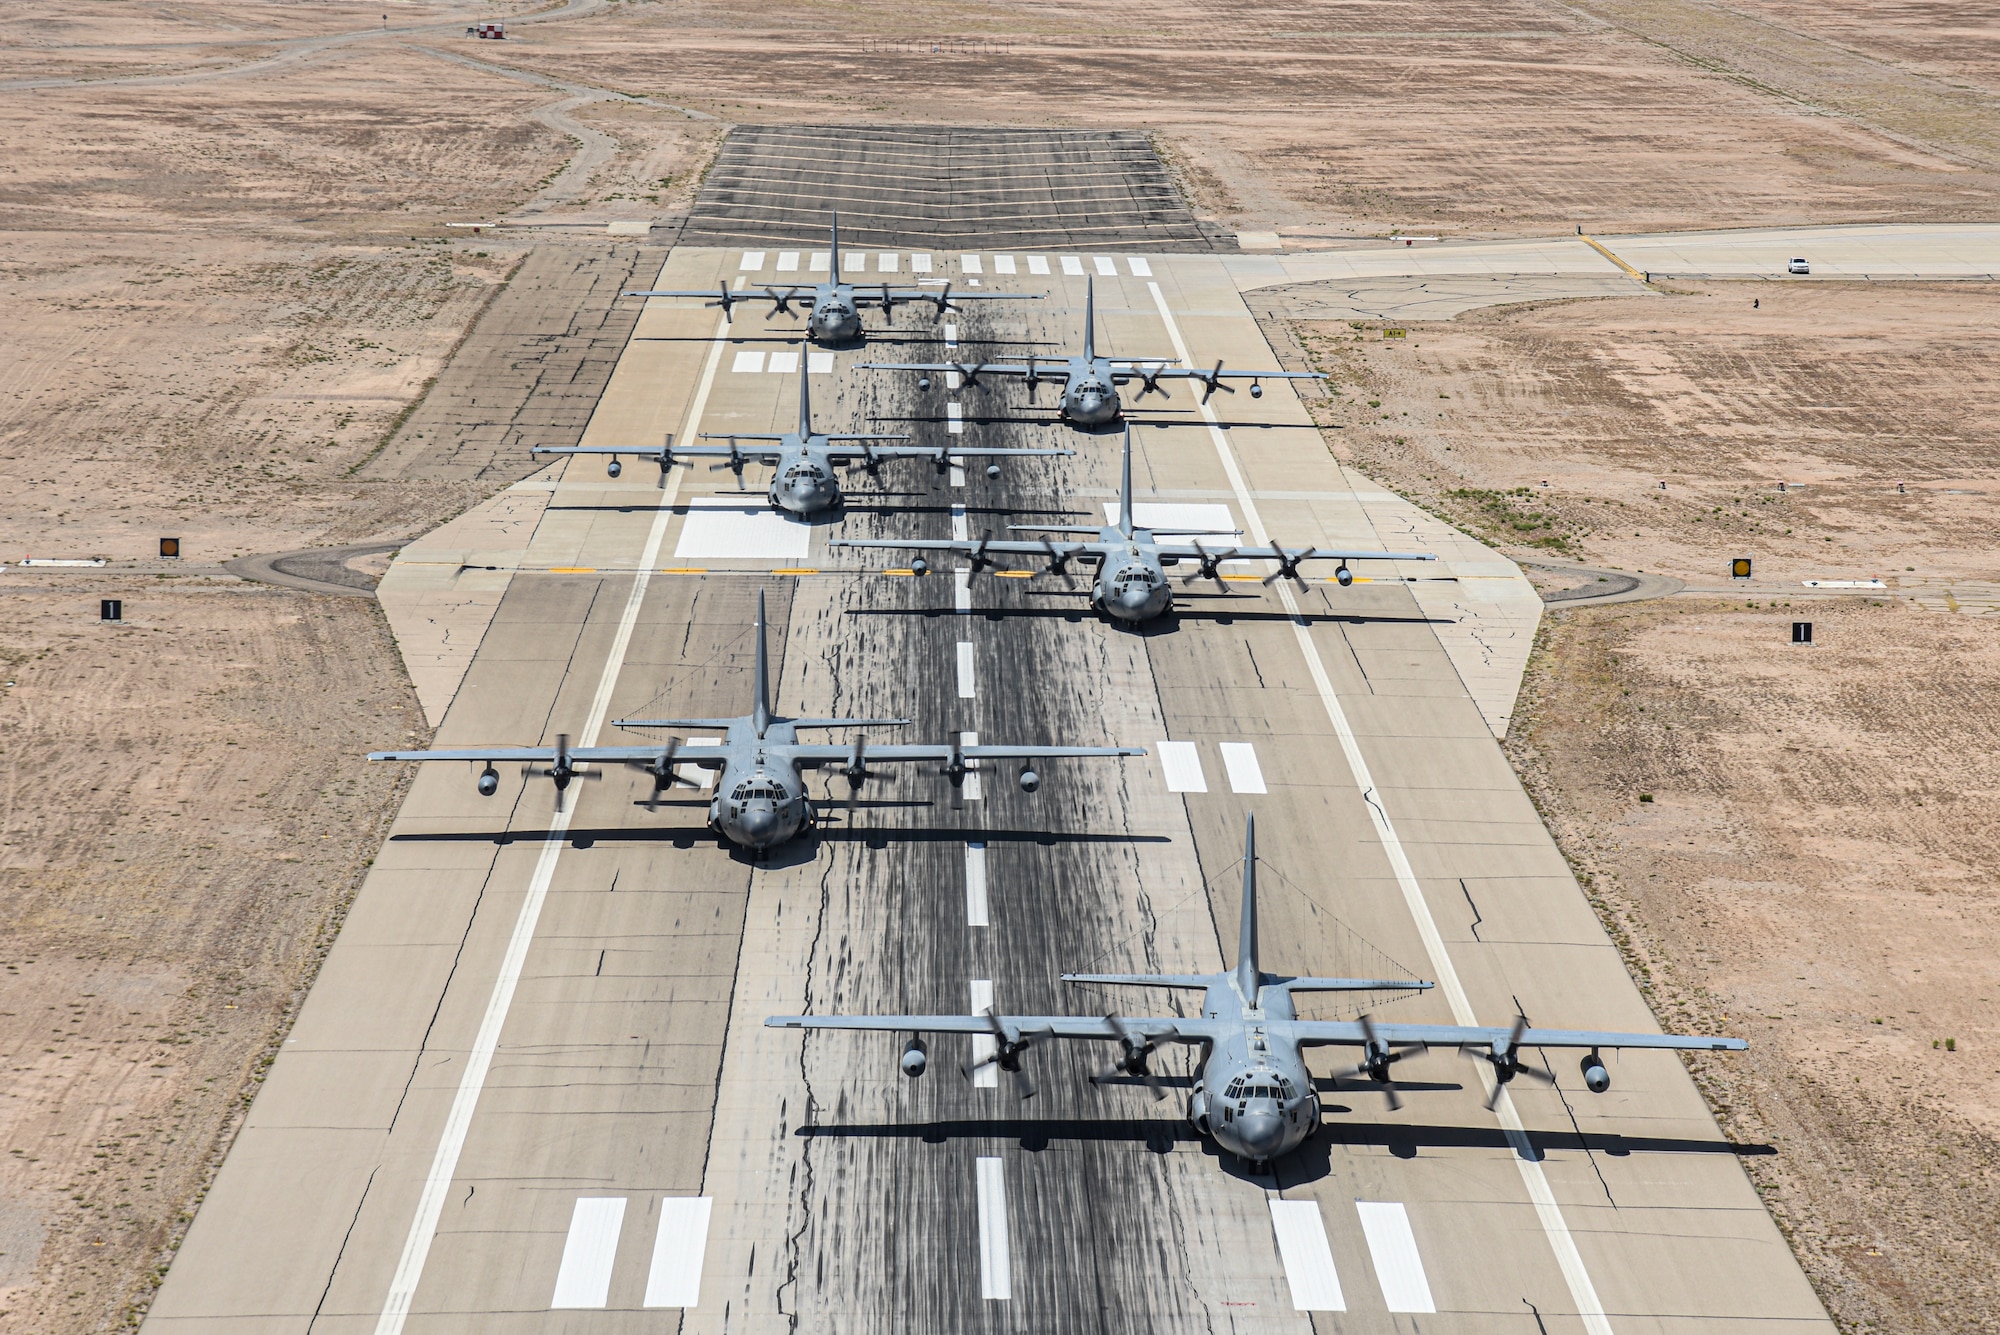 Pictured above is six aircraft lined up on a flight line.